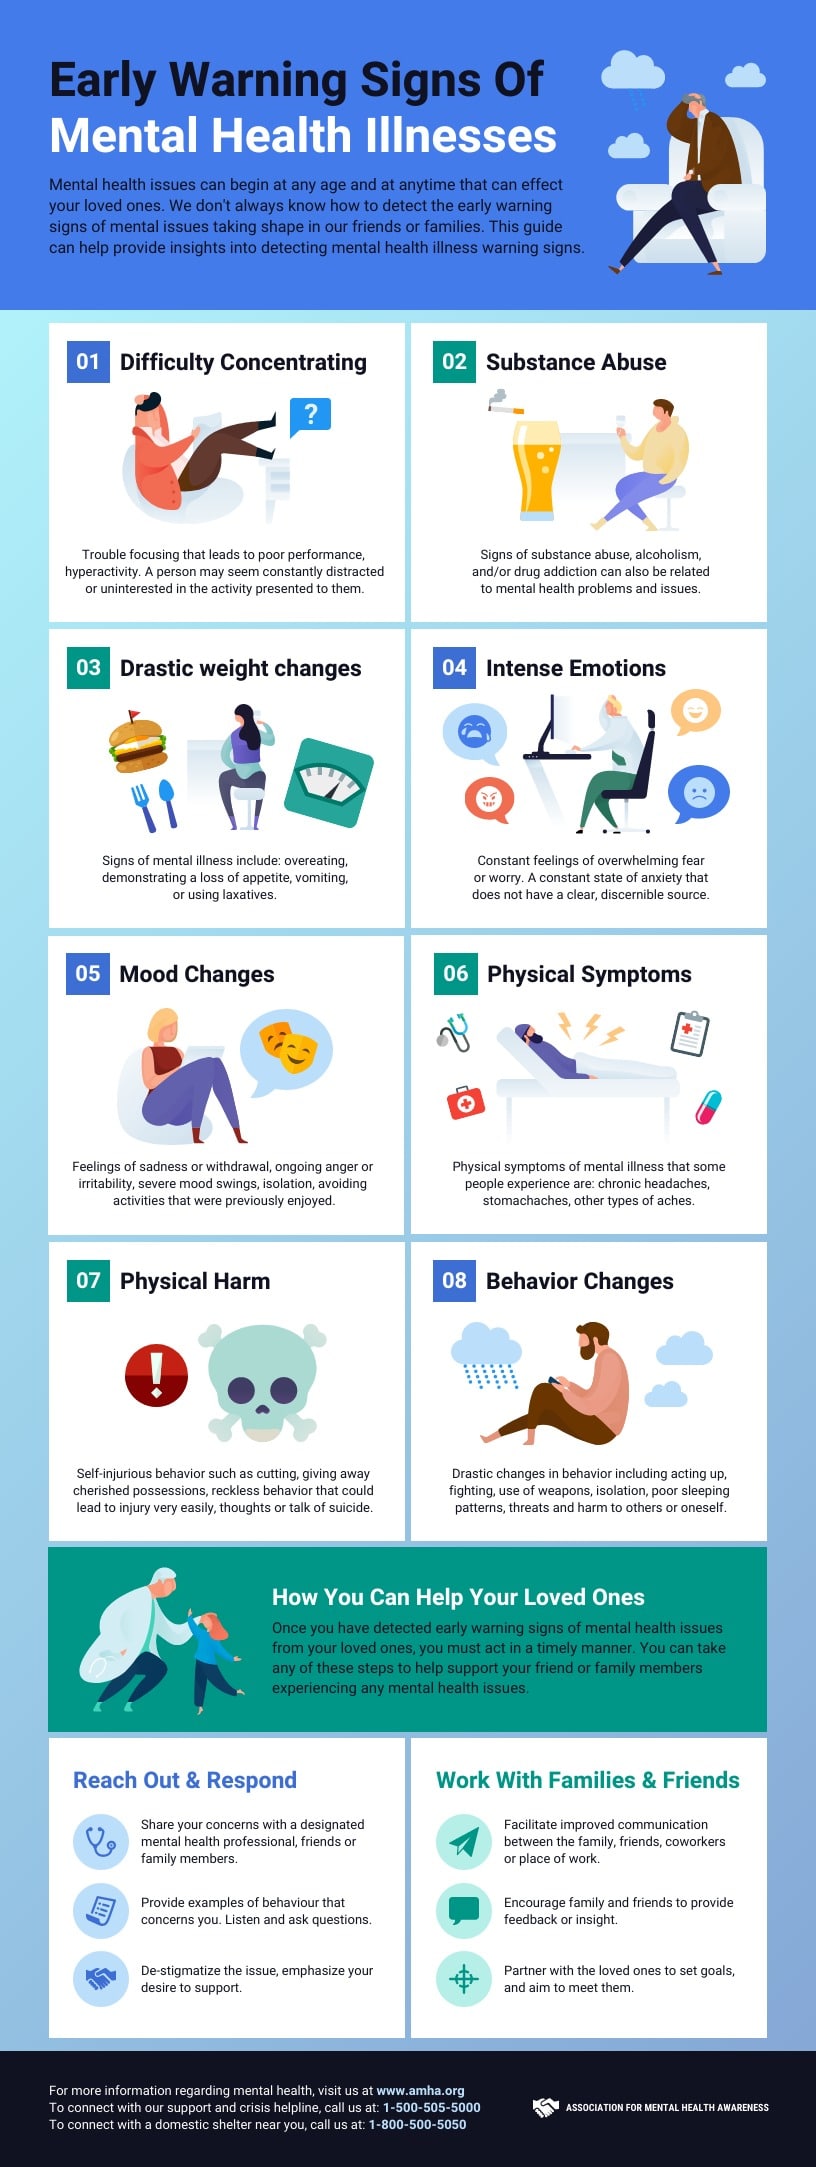 11 best Health images on Pinterest | Health, Anxiety awareness and Mental health